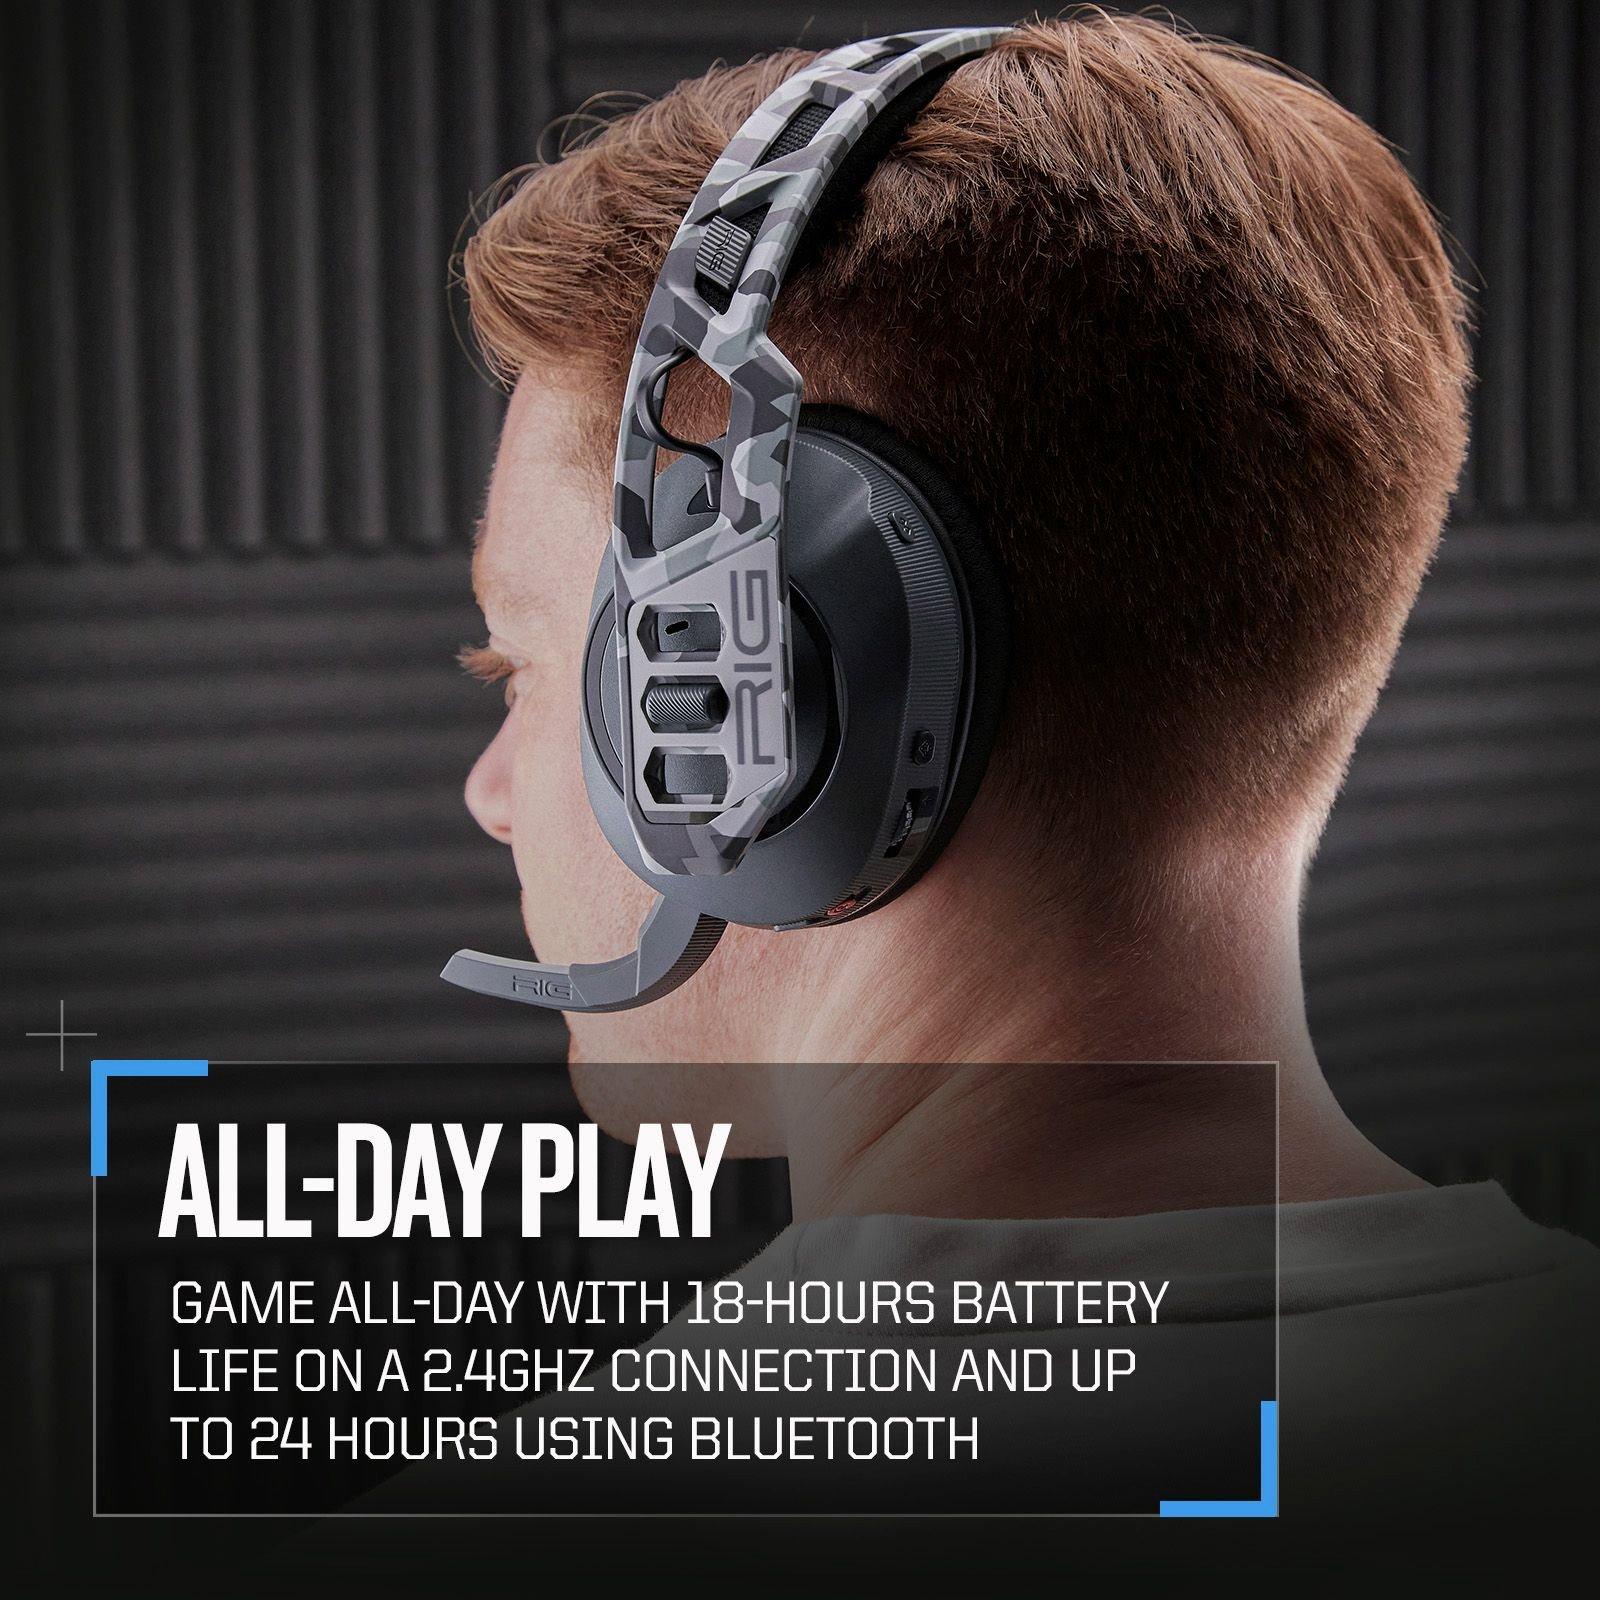 RIG 600 PRO HS Dual Bluetooth Wireless Gaming Headset  for PlayStation, Nintendo Switch and PC